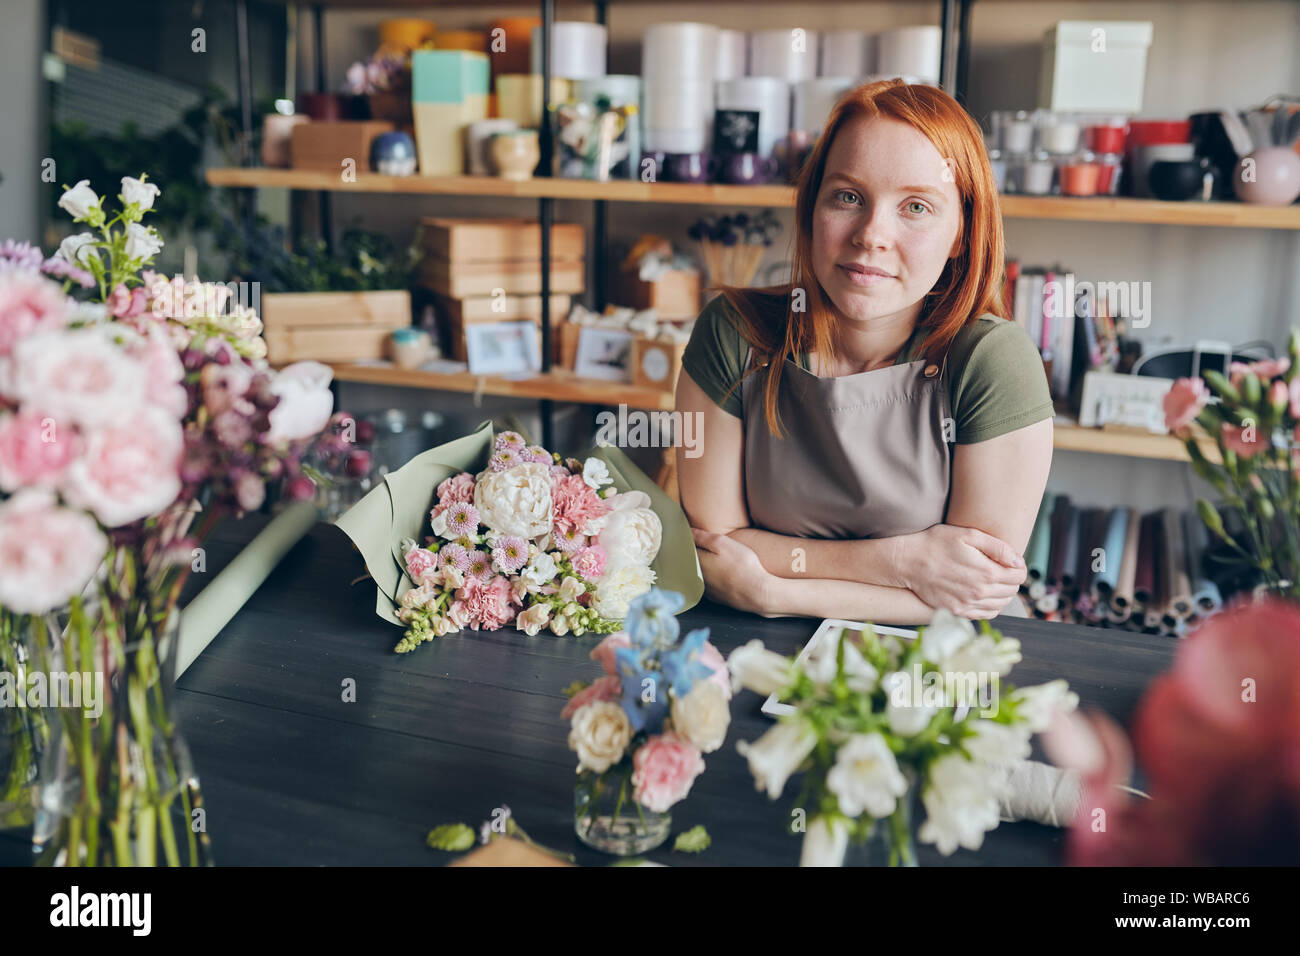 Florist in apron standing at counter Stock Photo